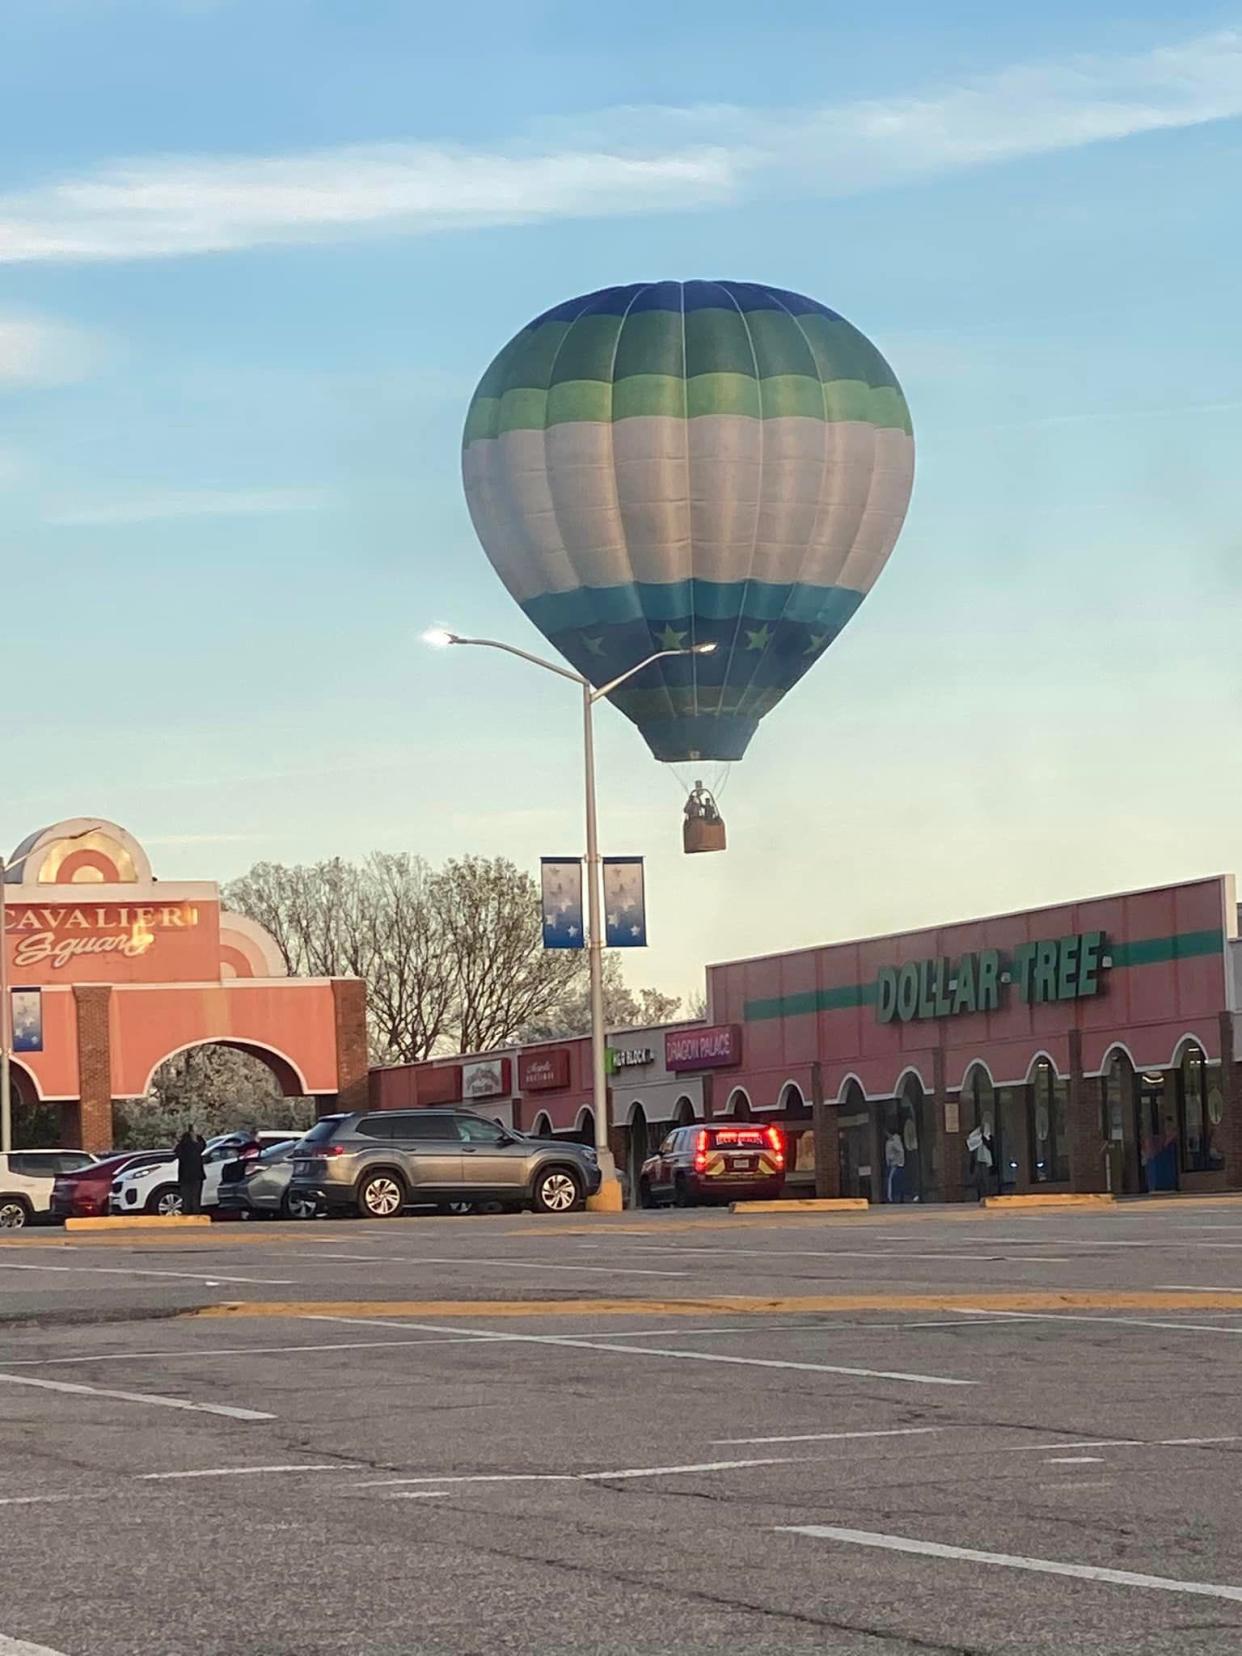 A hot-air balloon is shown making a descent  Sunday, March 5, 2023 near Cavalier Square in Hopewell.